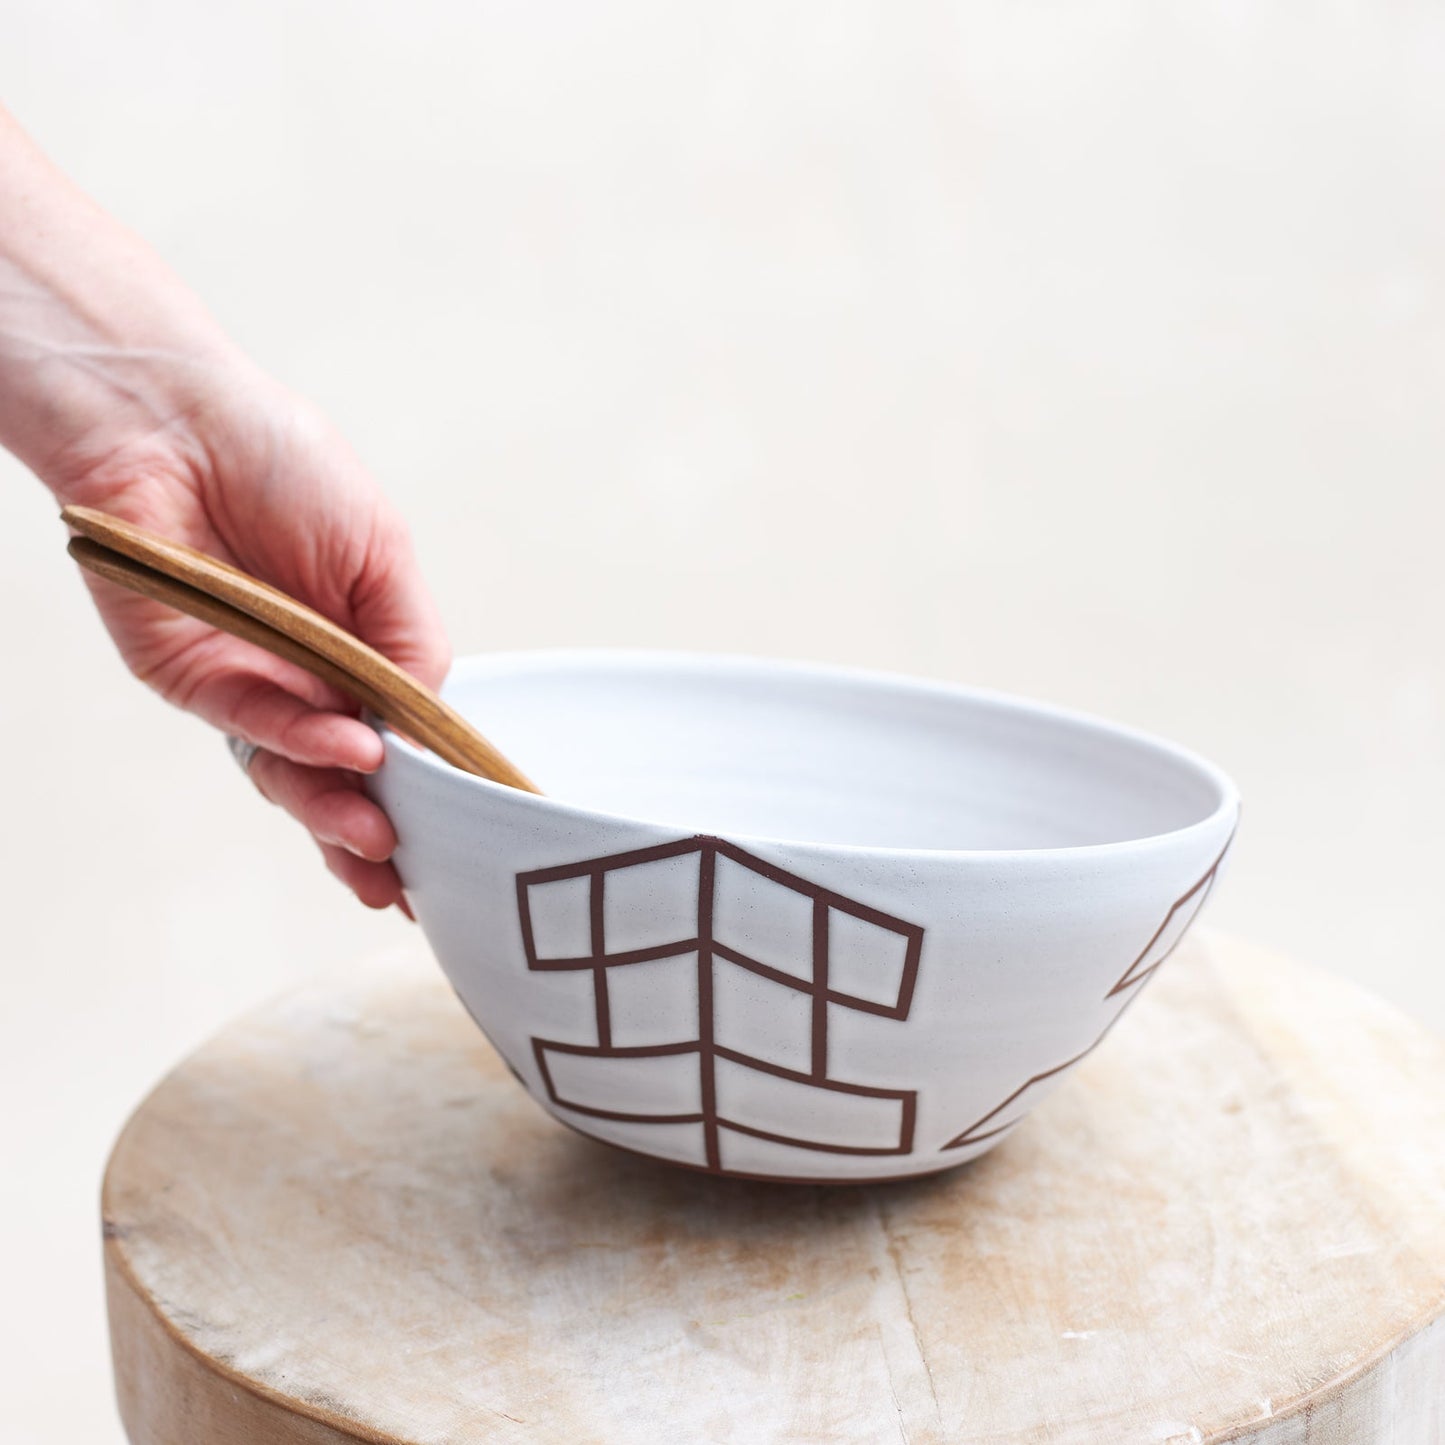  A front view of the 'Geometric Handmade Ceramic Bowl' with a white glaze and mahogany clay. Wooden salad servers are displayed in the ceramic bowl. The handmade ceramic bowl is being lifted by hand from a wooden stool.